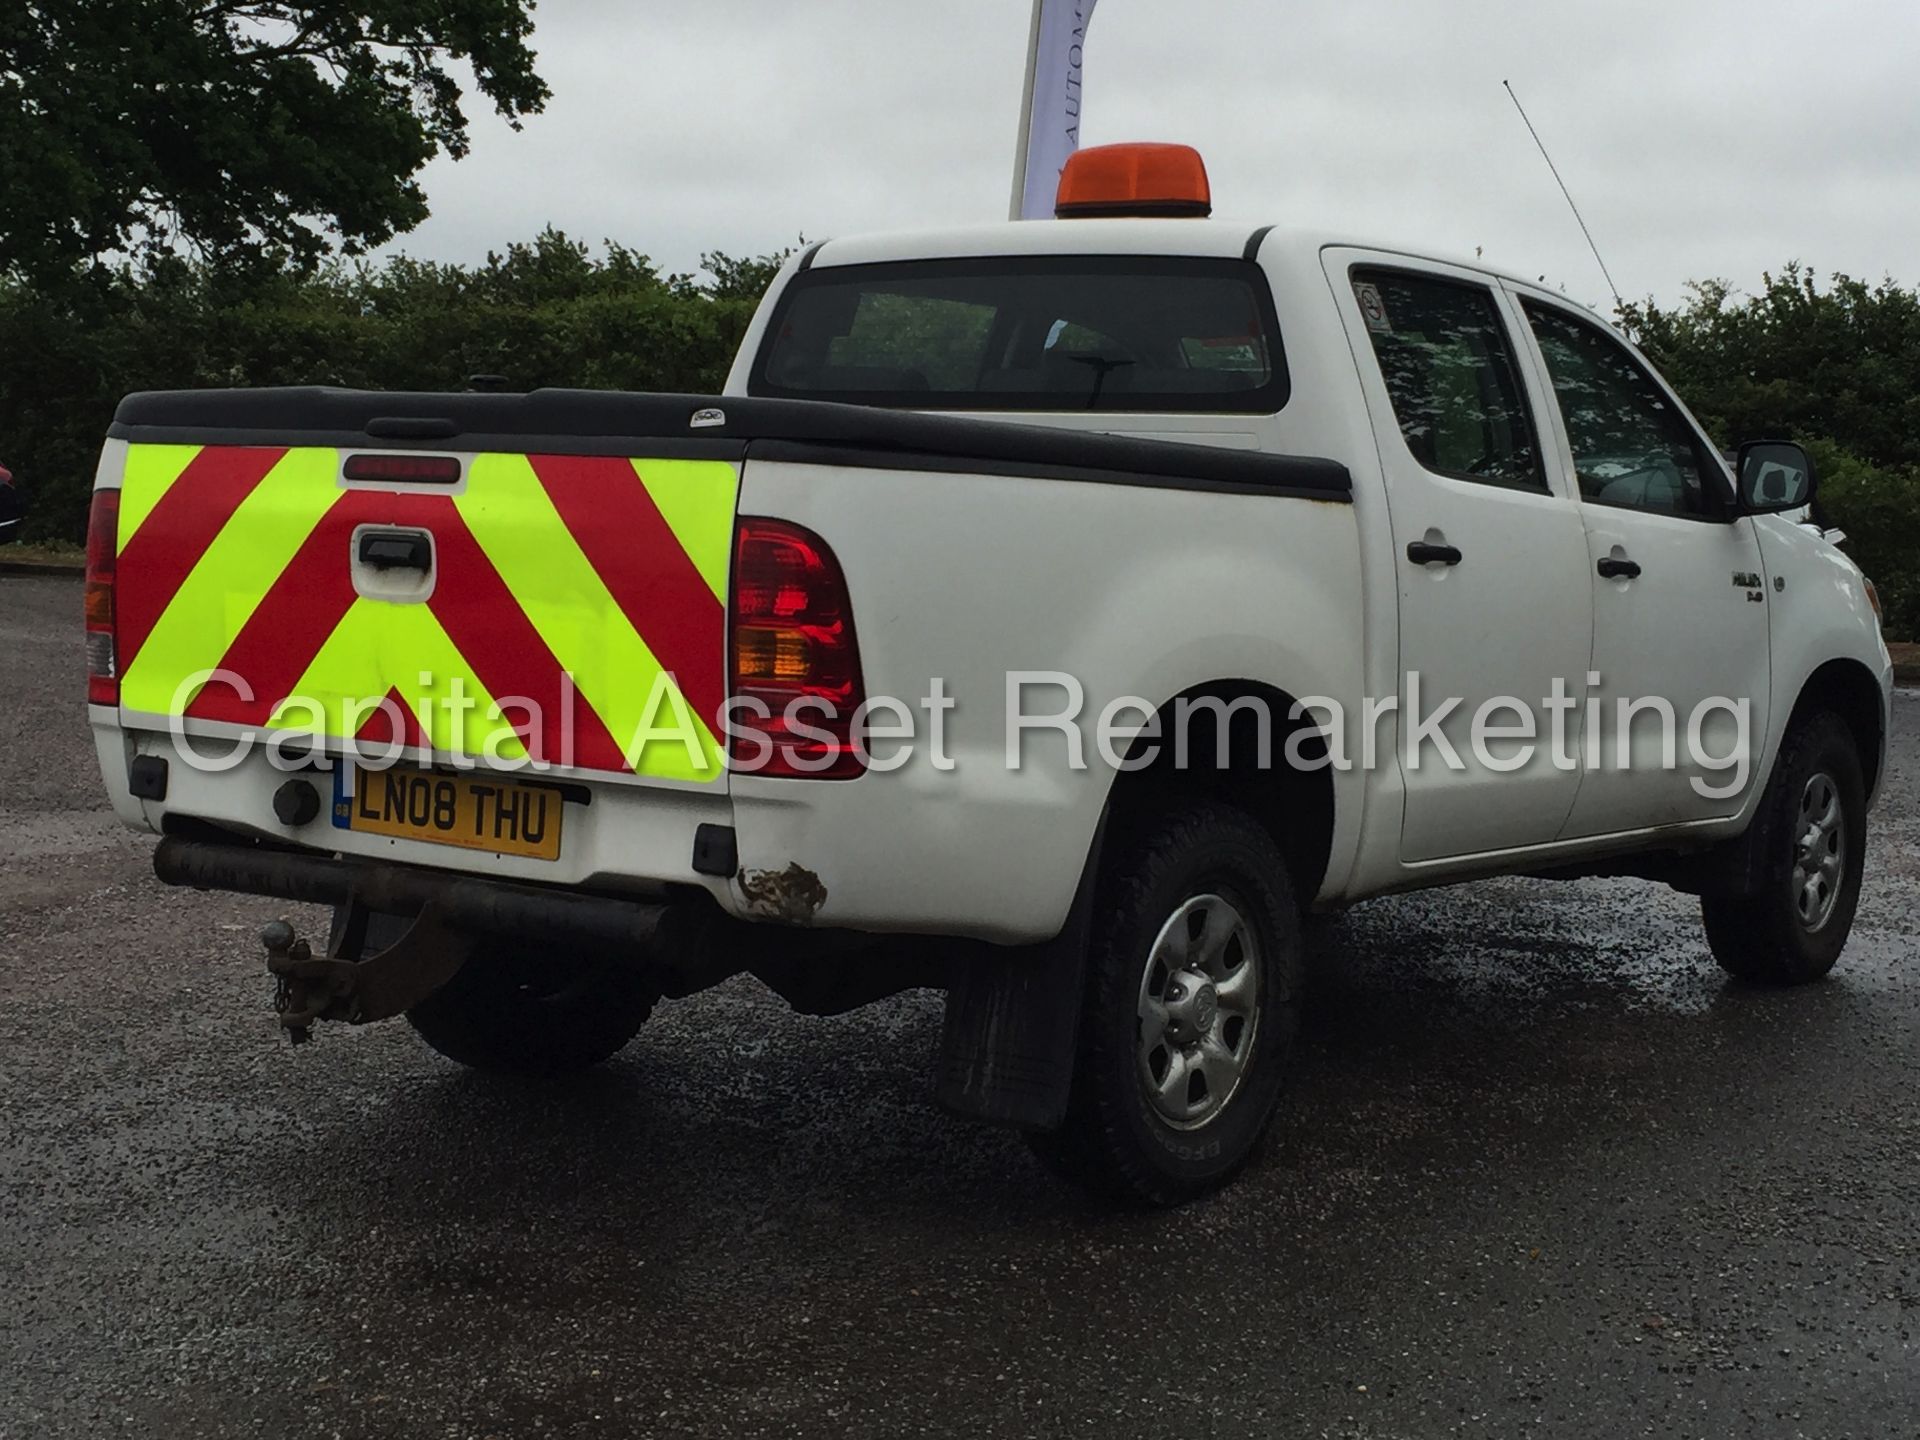 TOYOTA HILUX D-4D '171 BHP' (2008 - 08 REG) DOUBLE CAB PICK-UP (1 OWNER FROM NEW) - Image 7 of 23